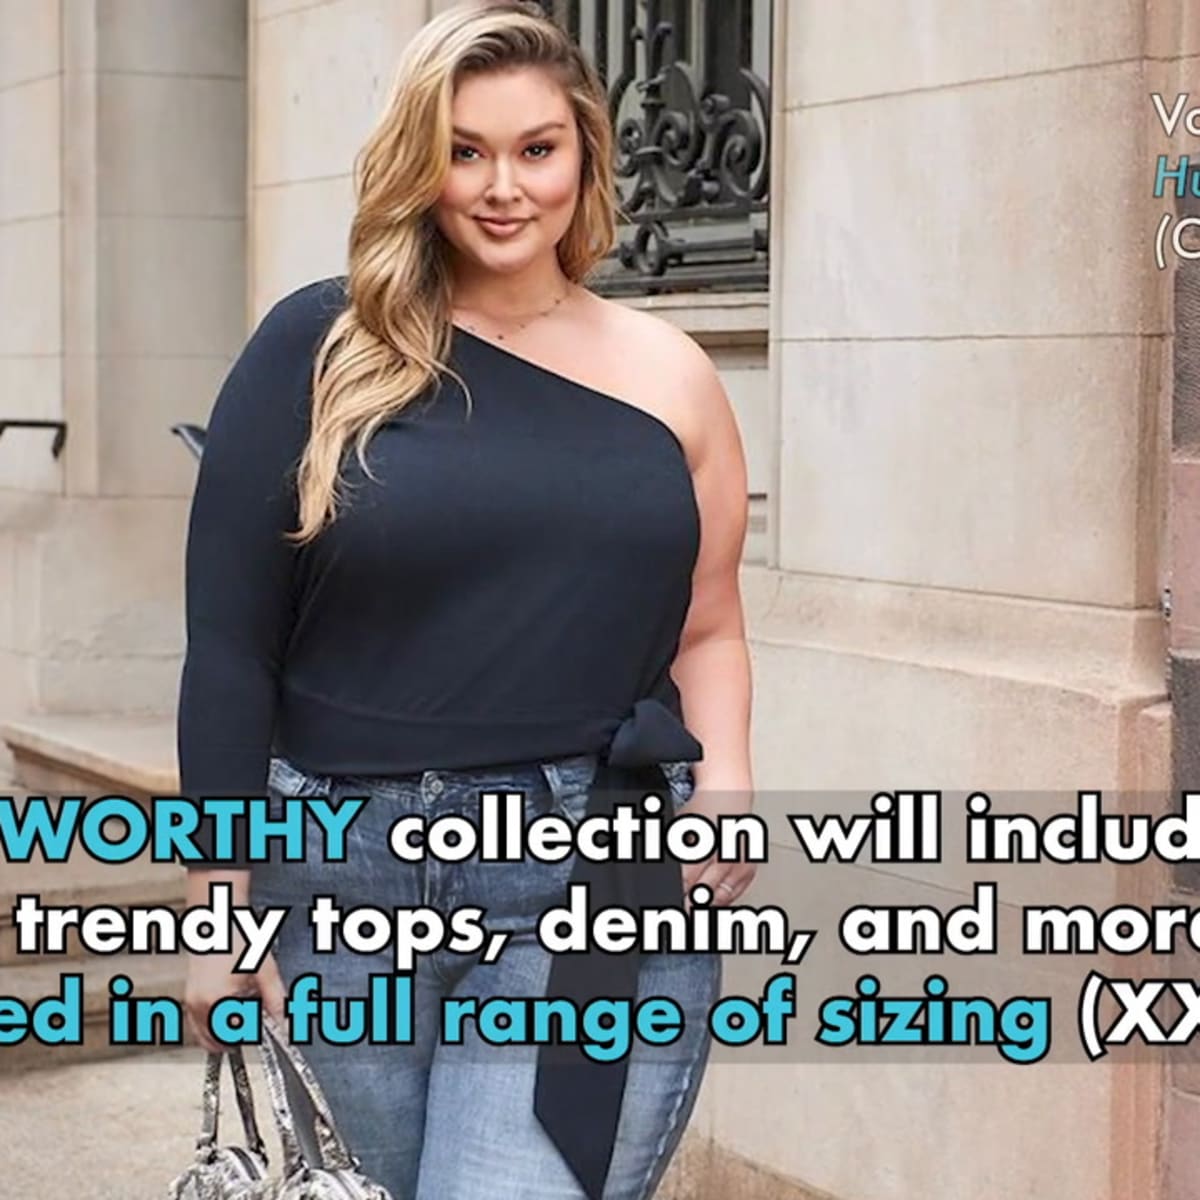 Hunter McGrady's Clothing Line All Worthy has Dropped on QVC - Swimsuit